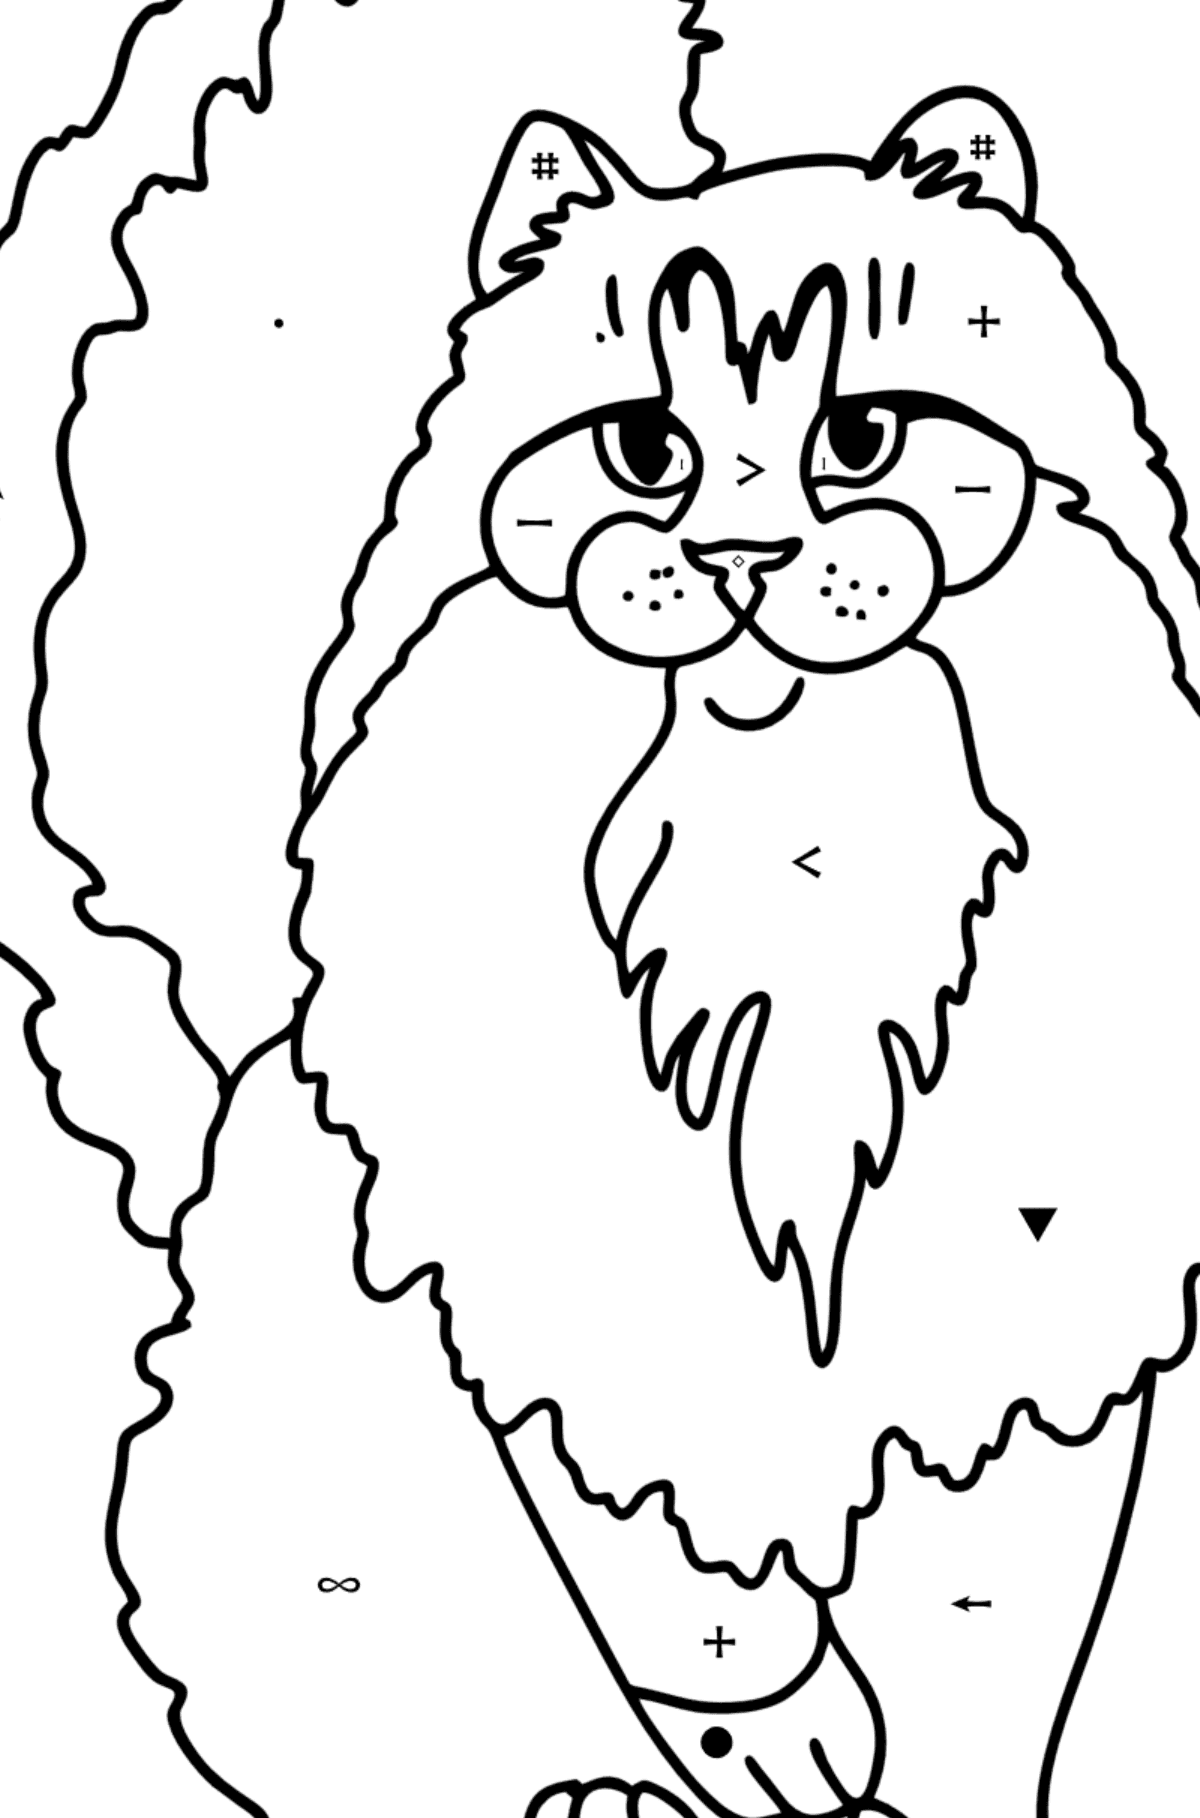 Norwegian Forest Cat coloring page - Coloring by Symbols for Kids